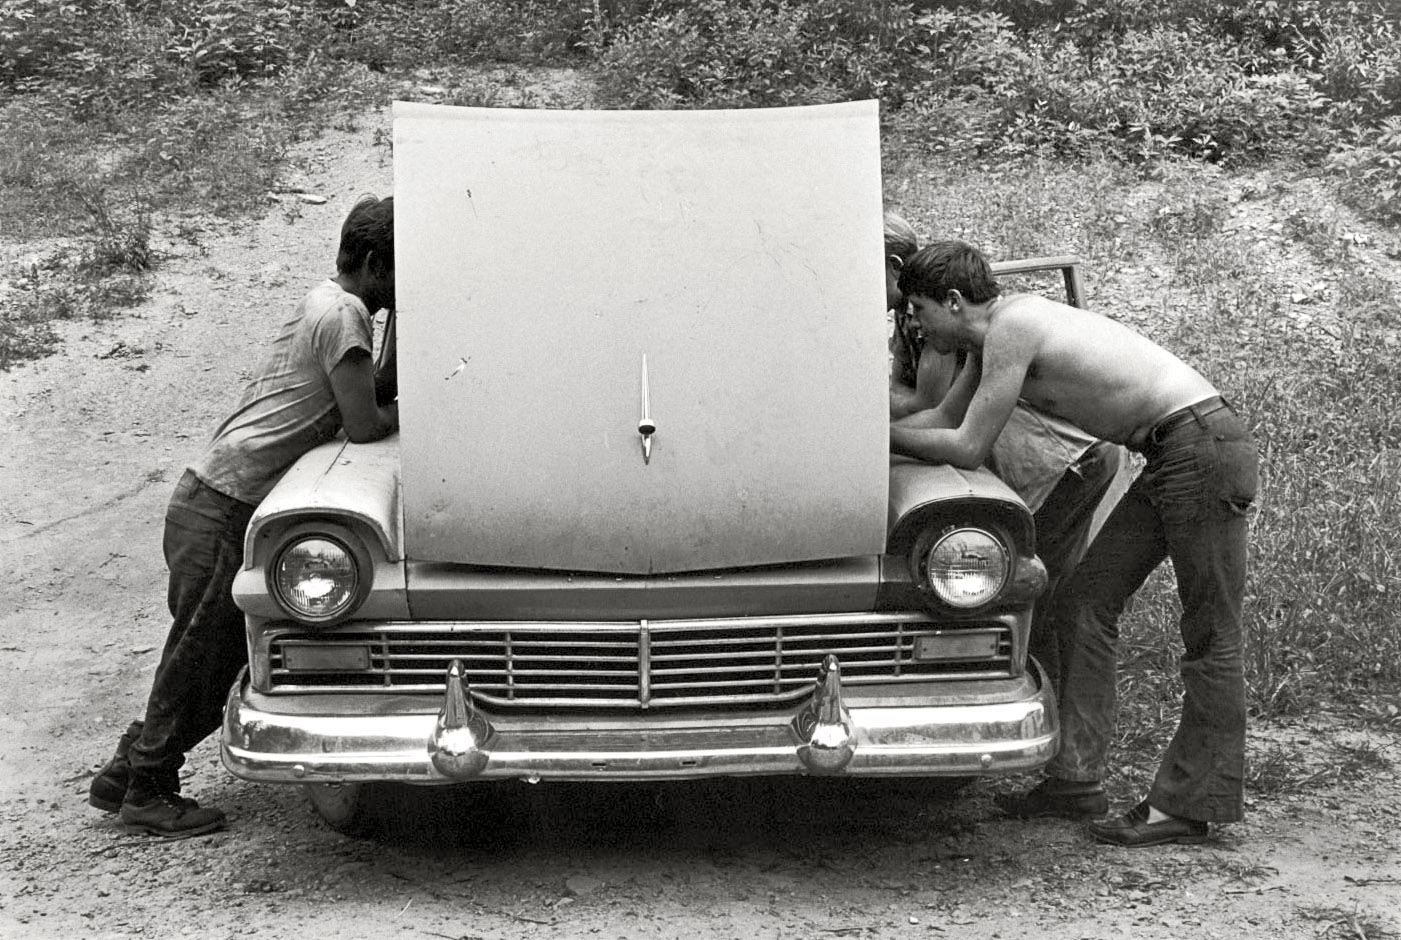 "Cornett family, Kentucky, 1972. Looking under hood of car." The Cornett men doing what Cornett men do. Print from 35mm negative by William Gedney. Gedney Photographs and Writings Collection, Duke University.  View full size.